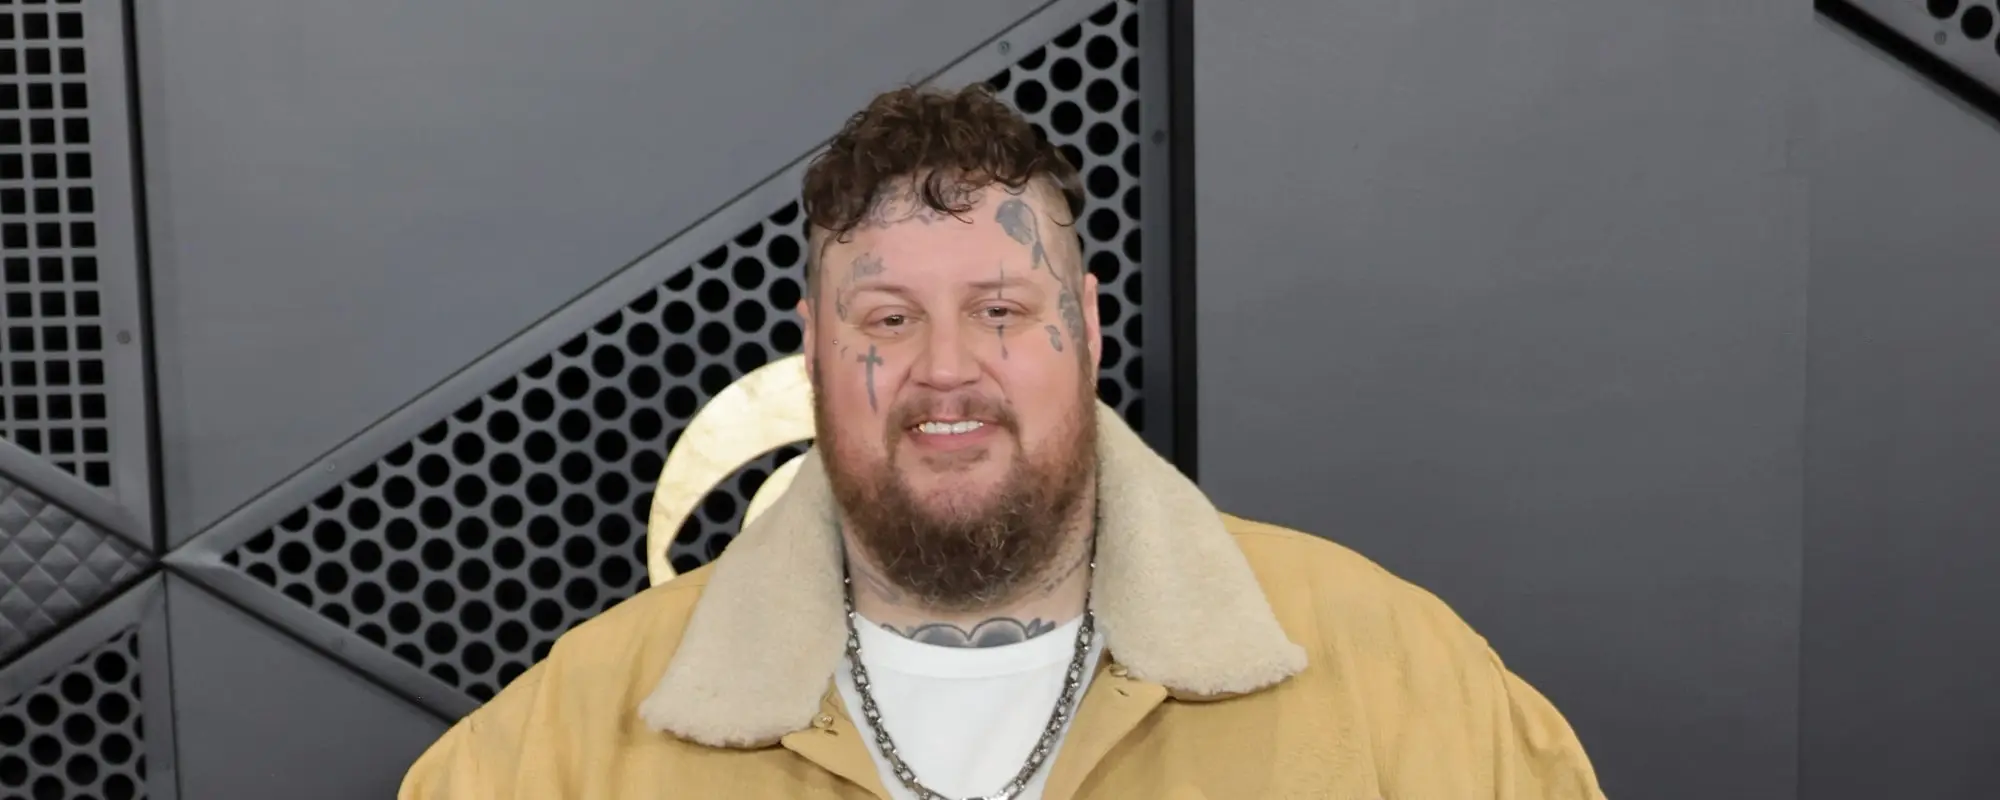 Jelly Roll Terrified of His Kids “Experimenting with Drugs,” Fears His Daughter’s Mother Will Become a “National Statistic”